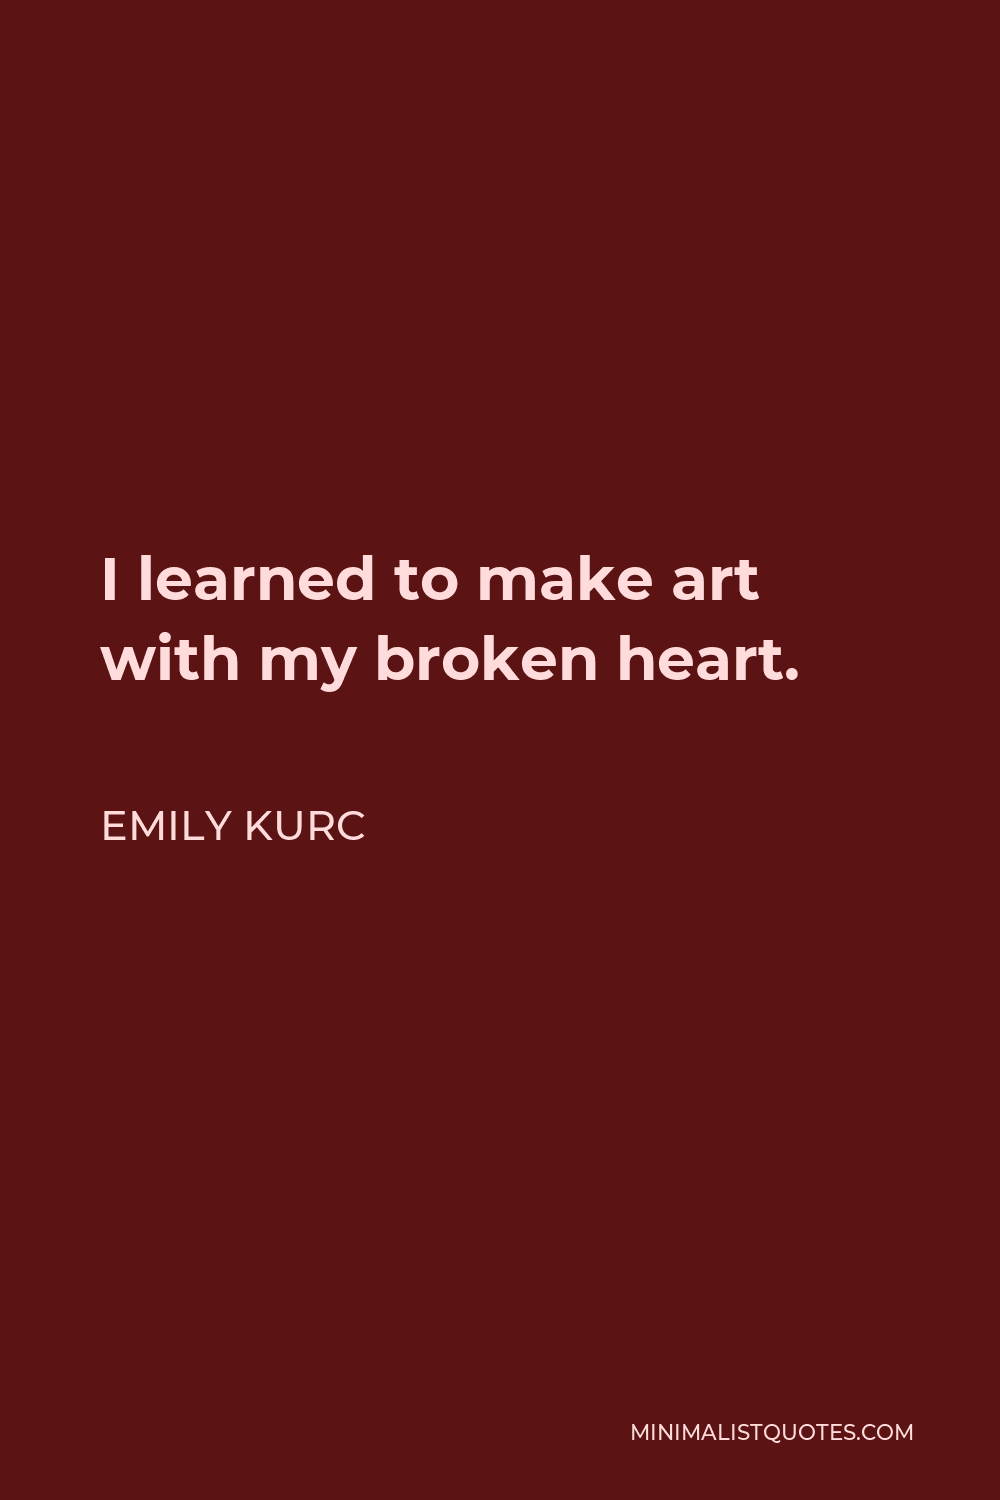 Emily Kurc Quote - I learned to make art with my broken heart.